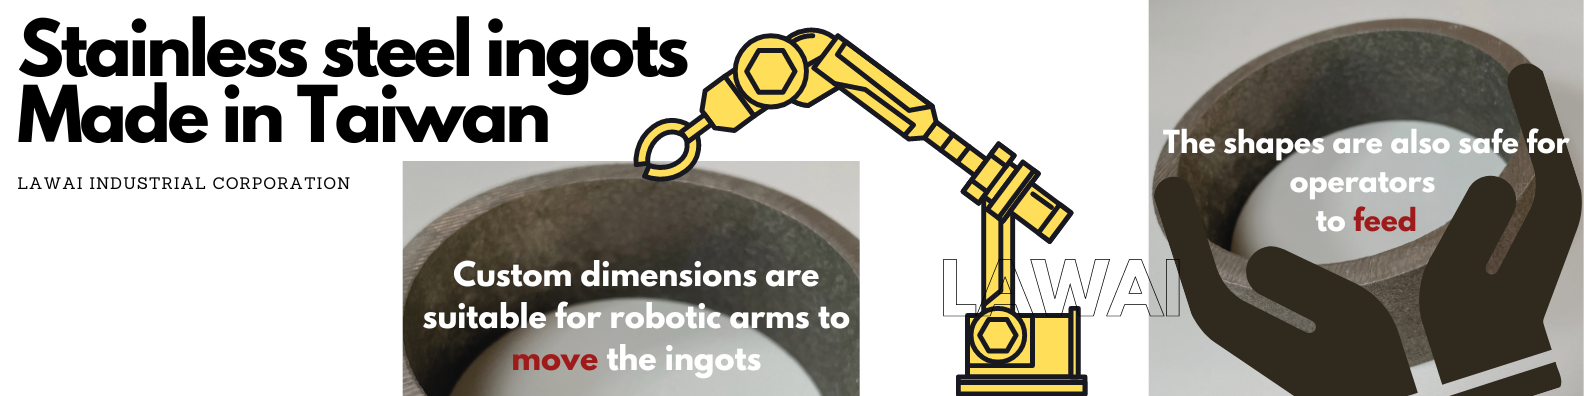 The stainless steel ingots and special alloy ingots are customized and they are safe and convenient for both robotic arms and operators to feed